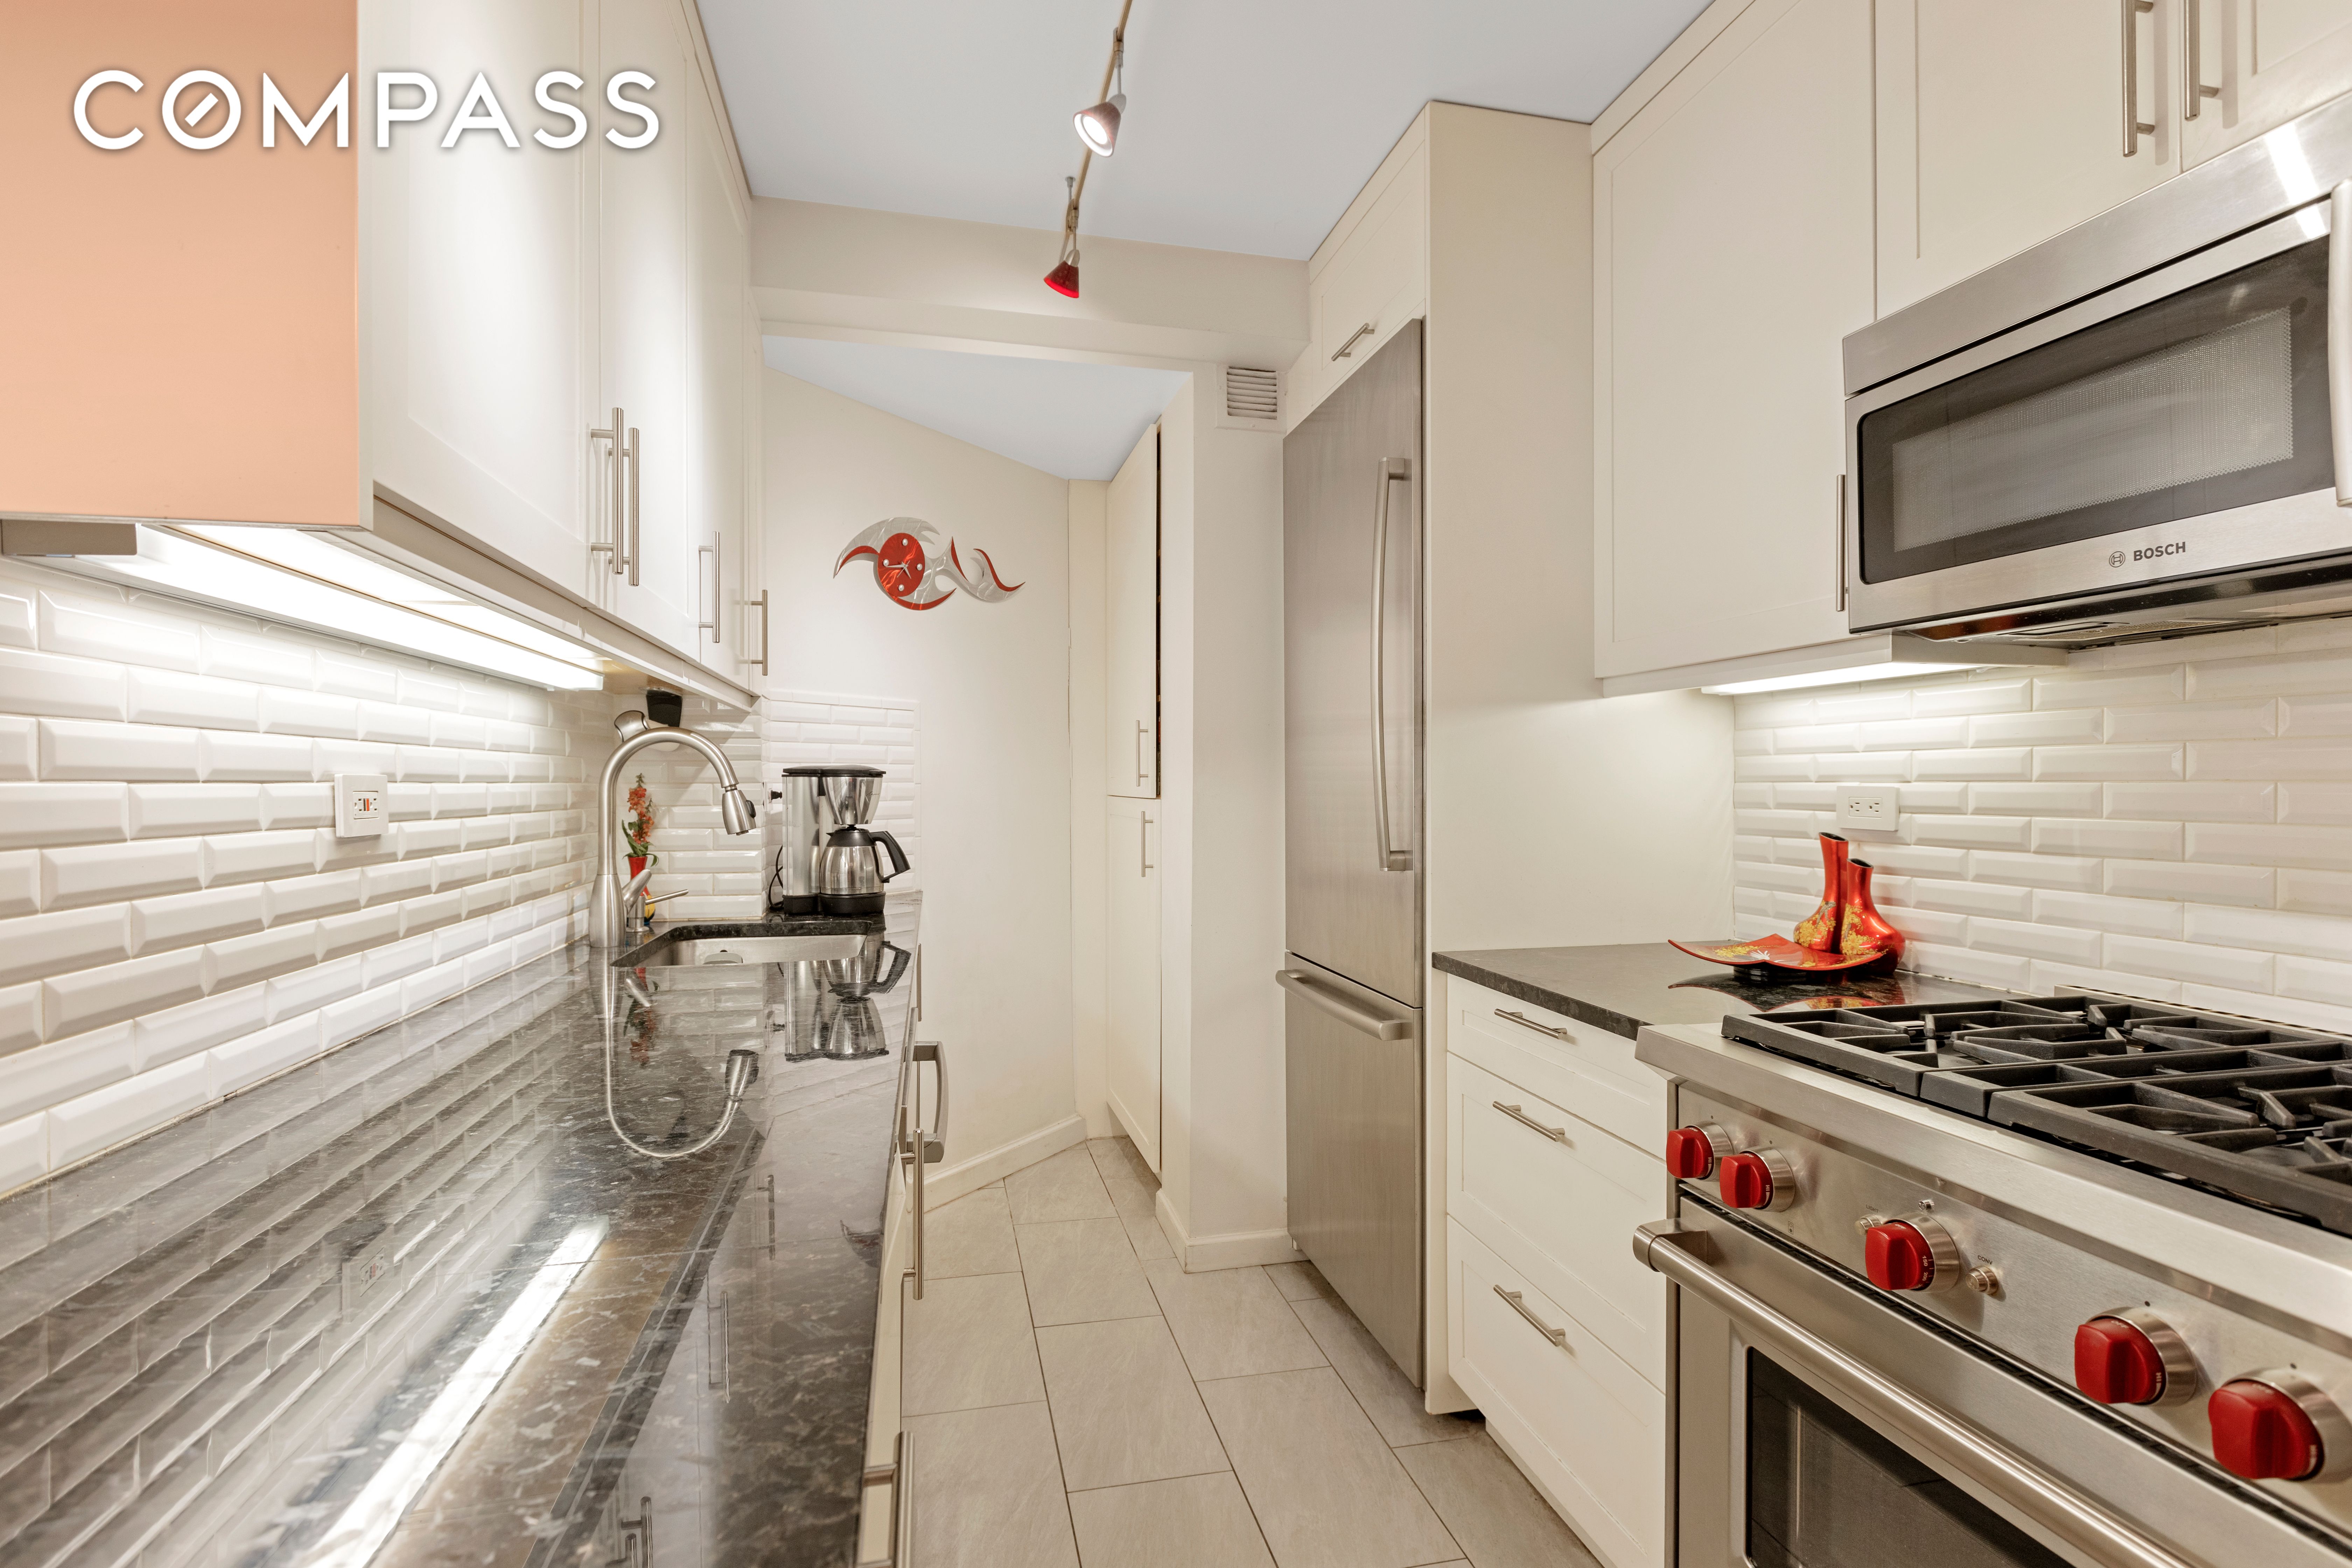 225 West 83rd Street 4-A Upper West Side New York NY 10024